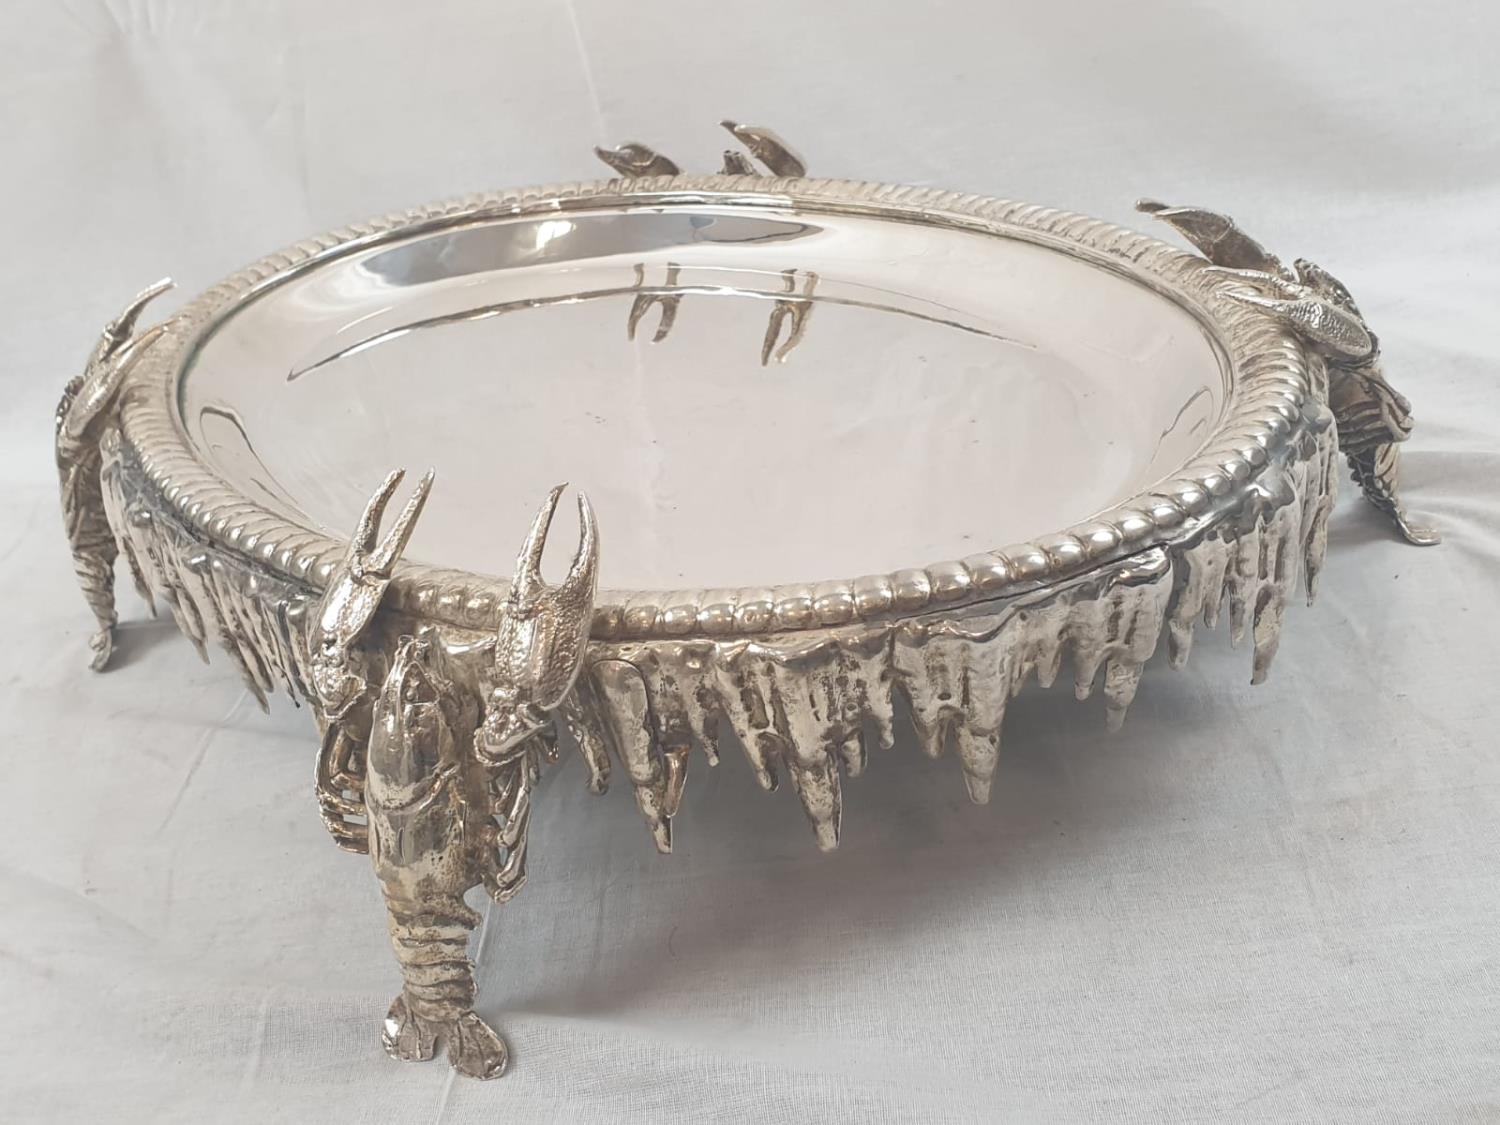 A VERY RARE SPANISH SILVER LOBSTER SERVING TRAY CIRCA 1920 , 4.2KG AND 50 X 35 CMS. AN INTERESTING - Bild 2 aus 10